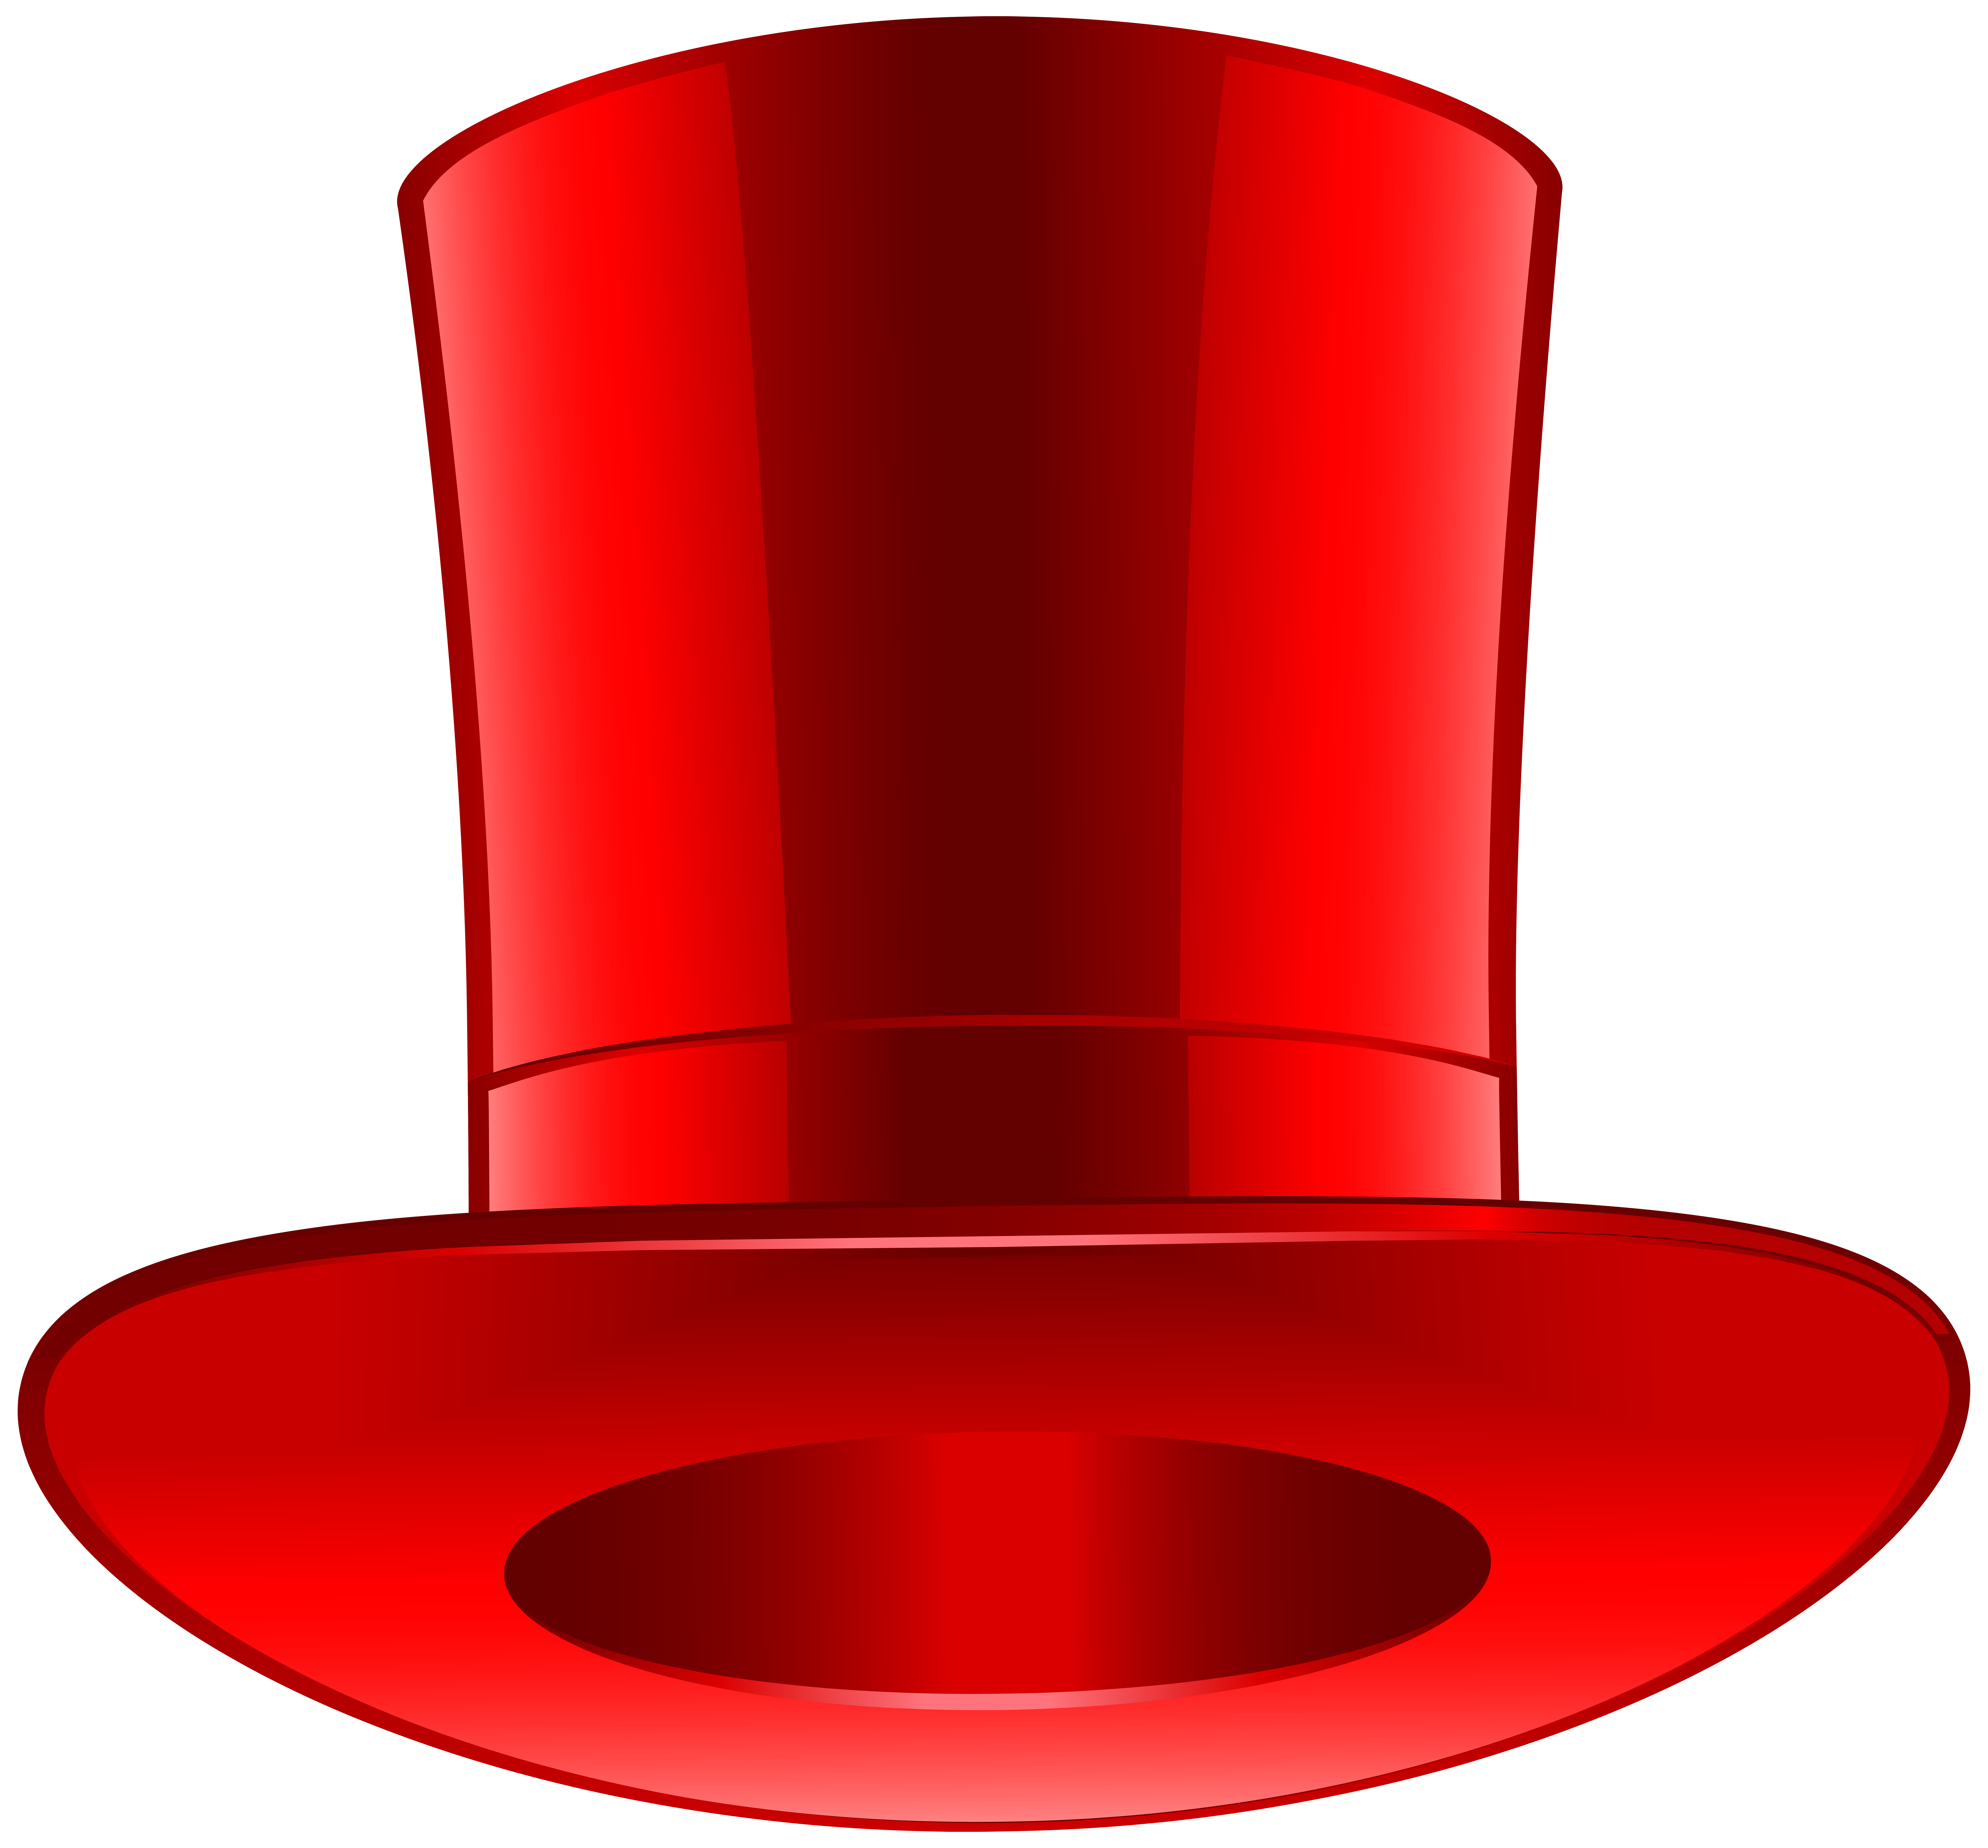 red hat clip art download - photo #9